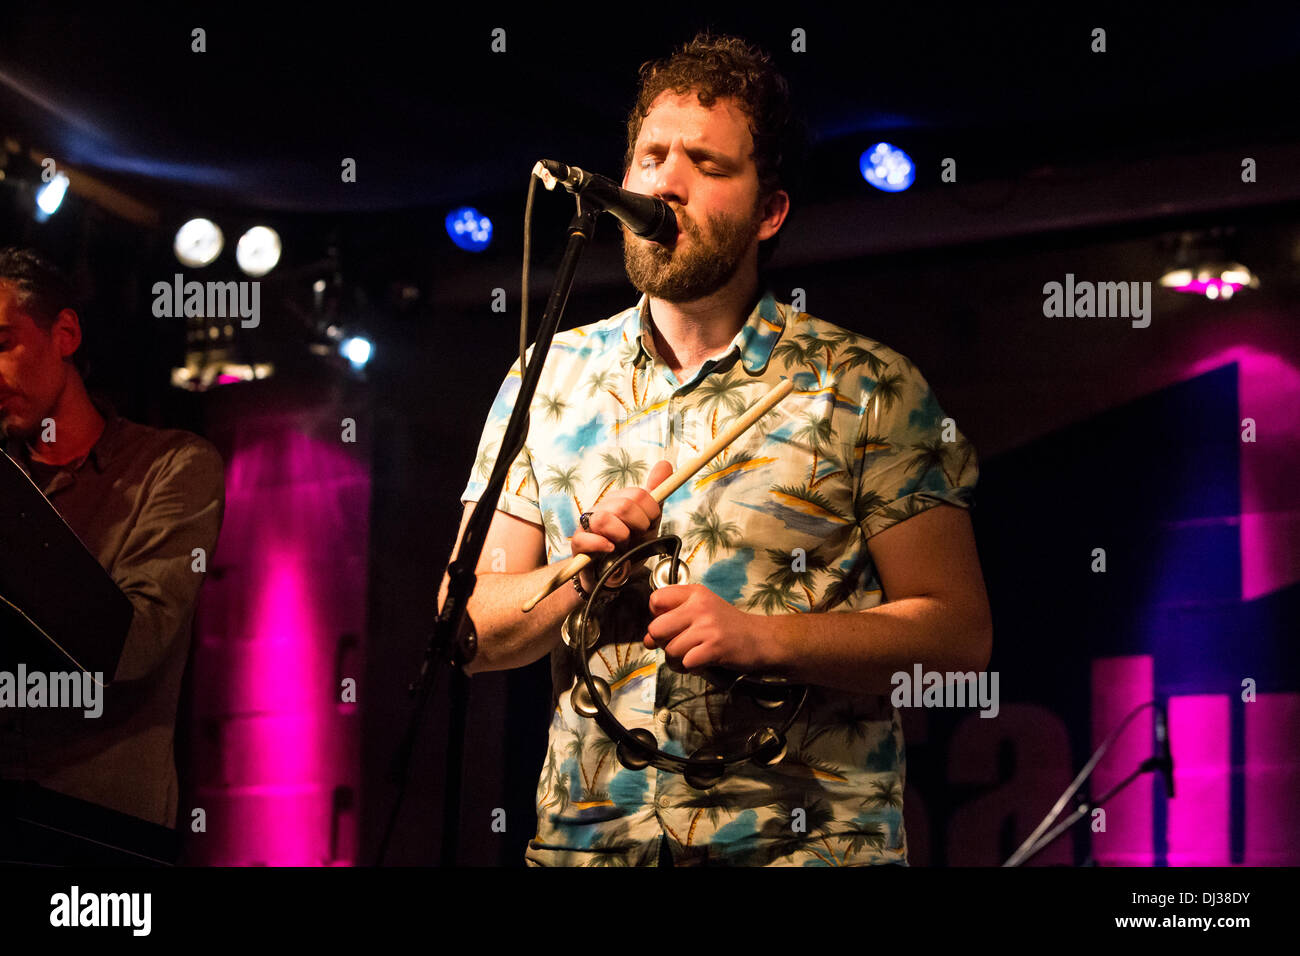 Milan Italy. 19th November 2013. The American indie-rock band CAVEMAN performs live at the Salumeria Della Musica opening the show of Phosphorescent Credit:  Rodolfo Sassano/Alamy Live News Stock Photo